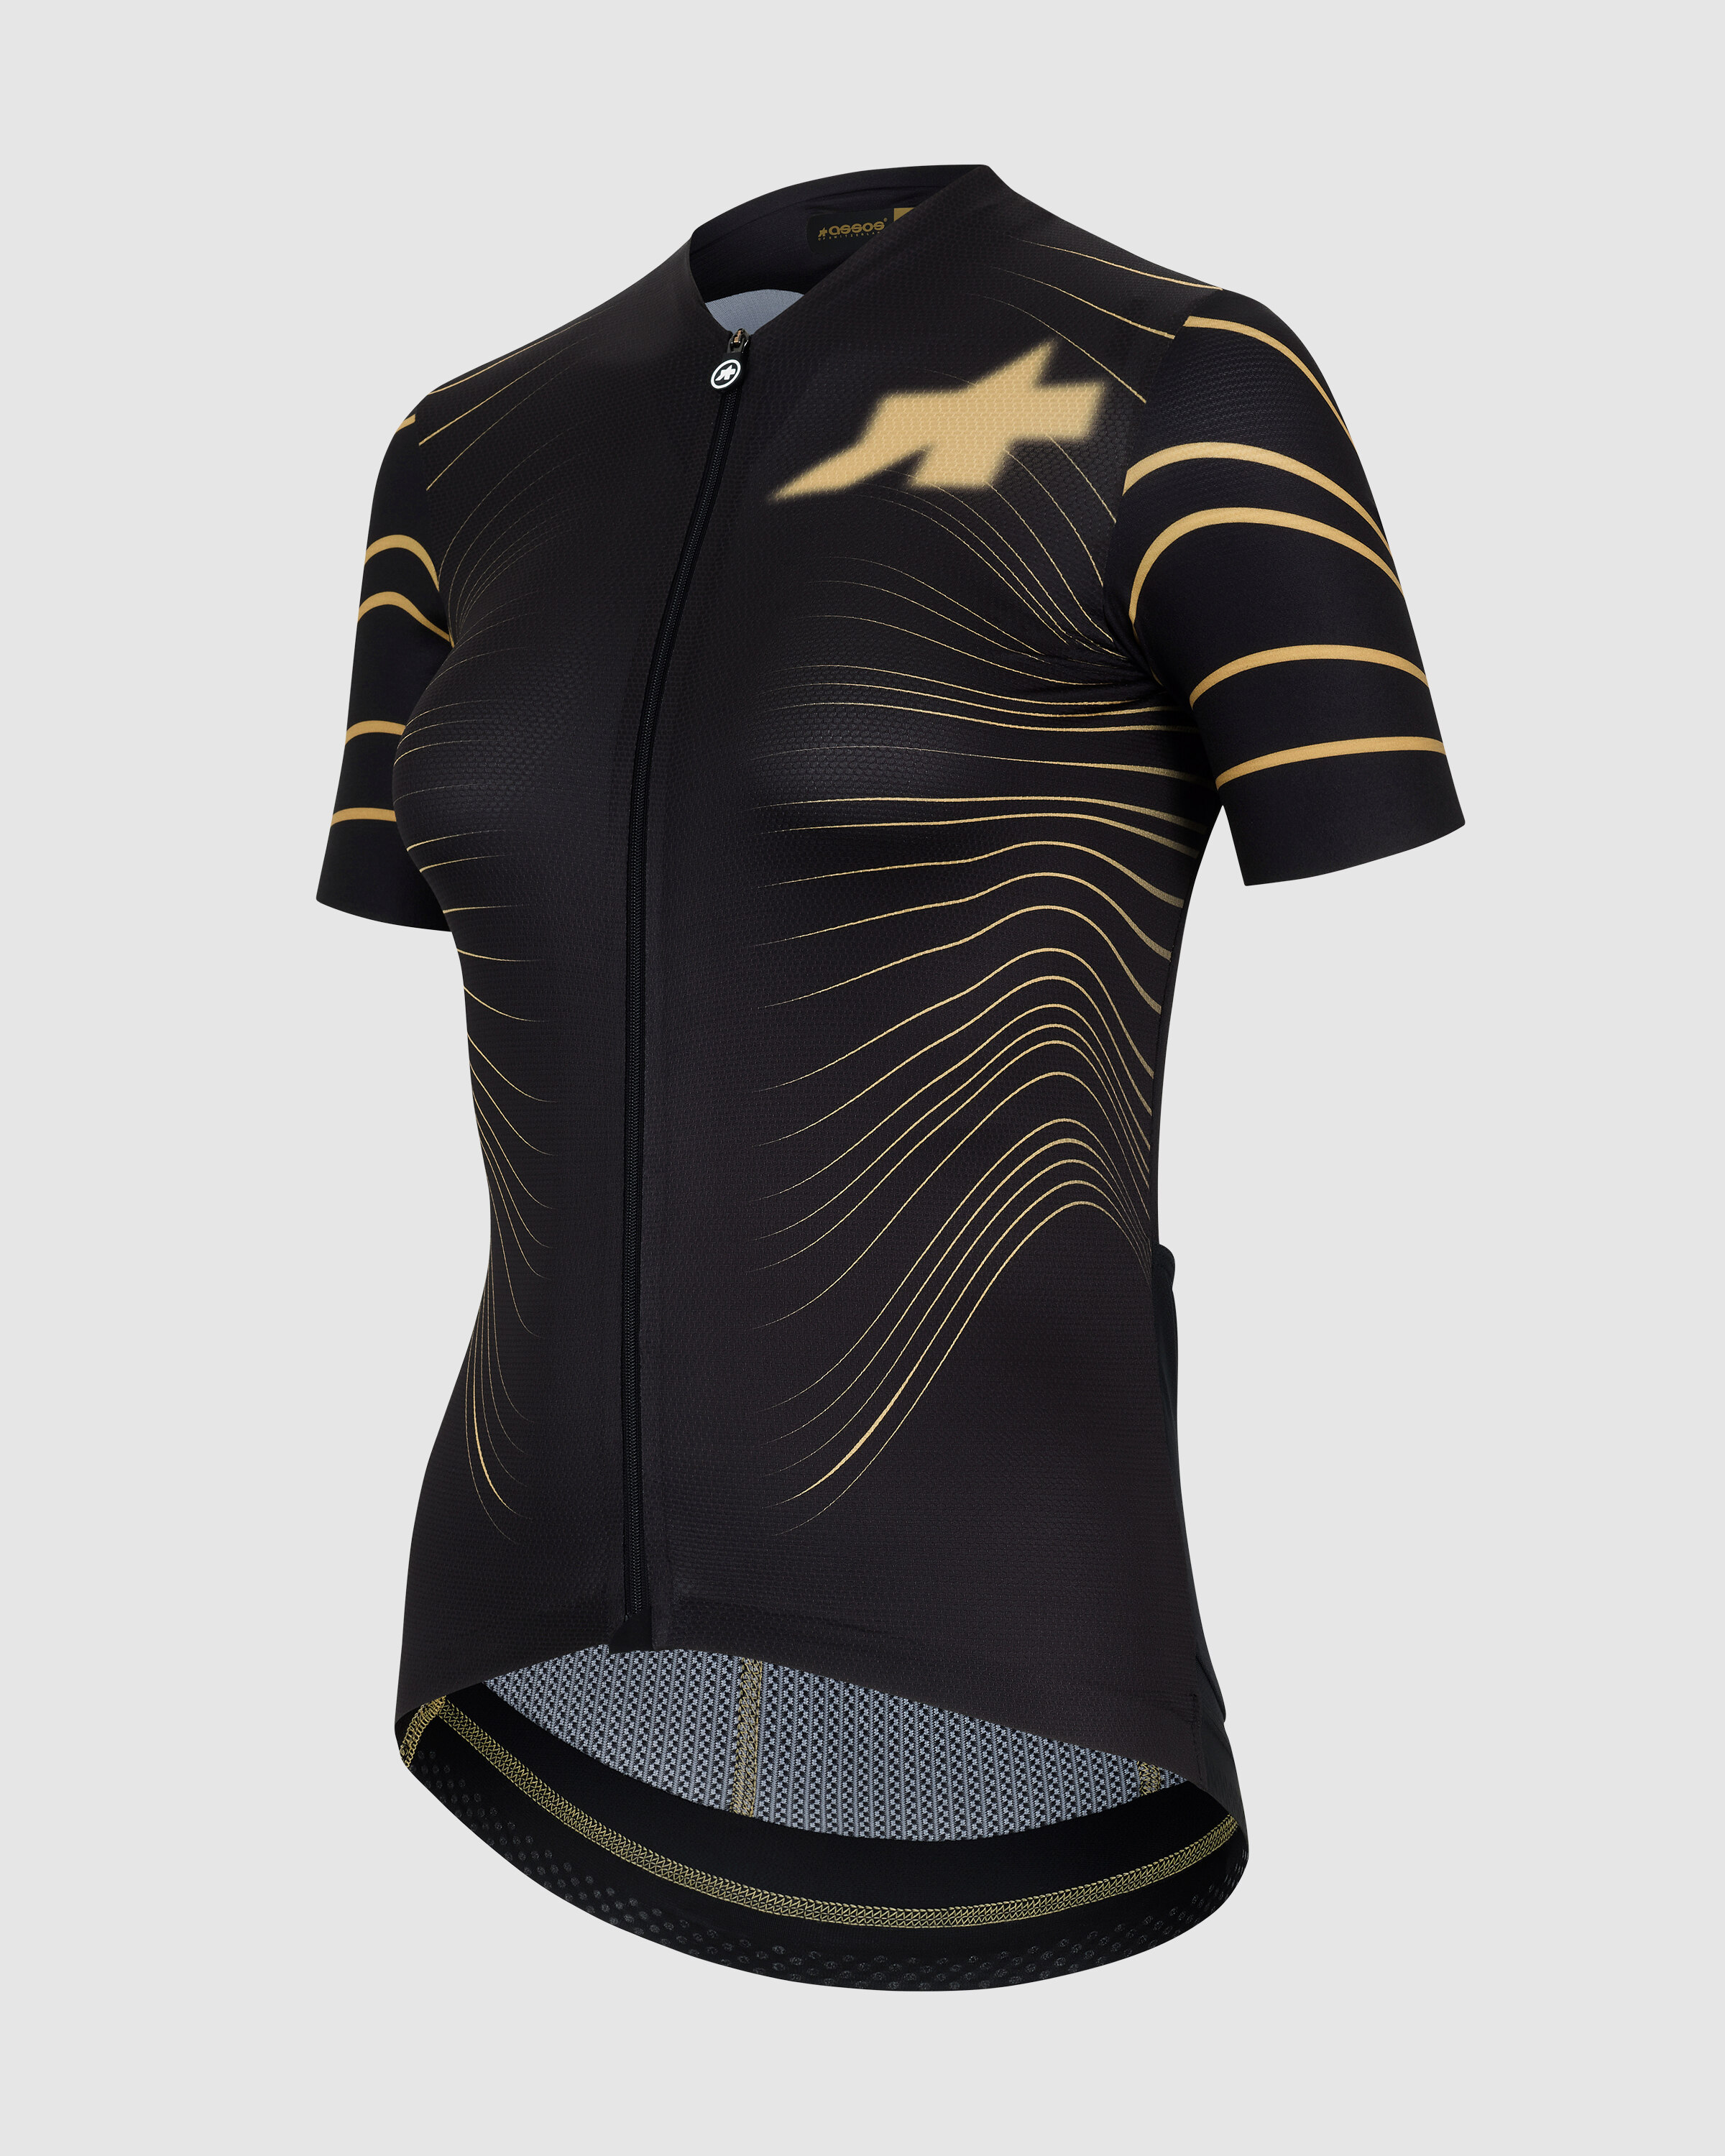 DYORA RS JERSEY S9 - WINGS OF SPEED - ASSOS Of Switzerland - Official Outlet